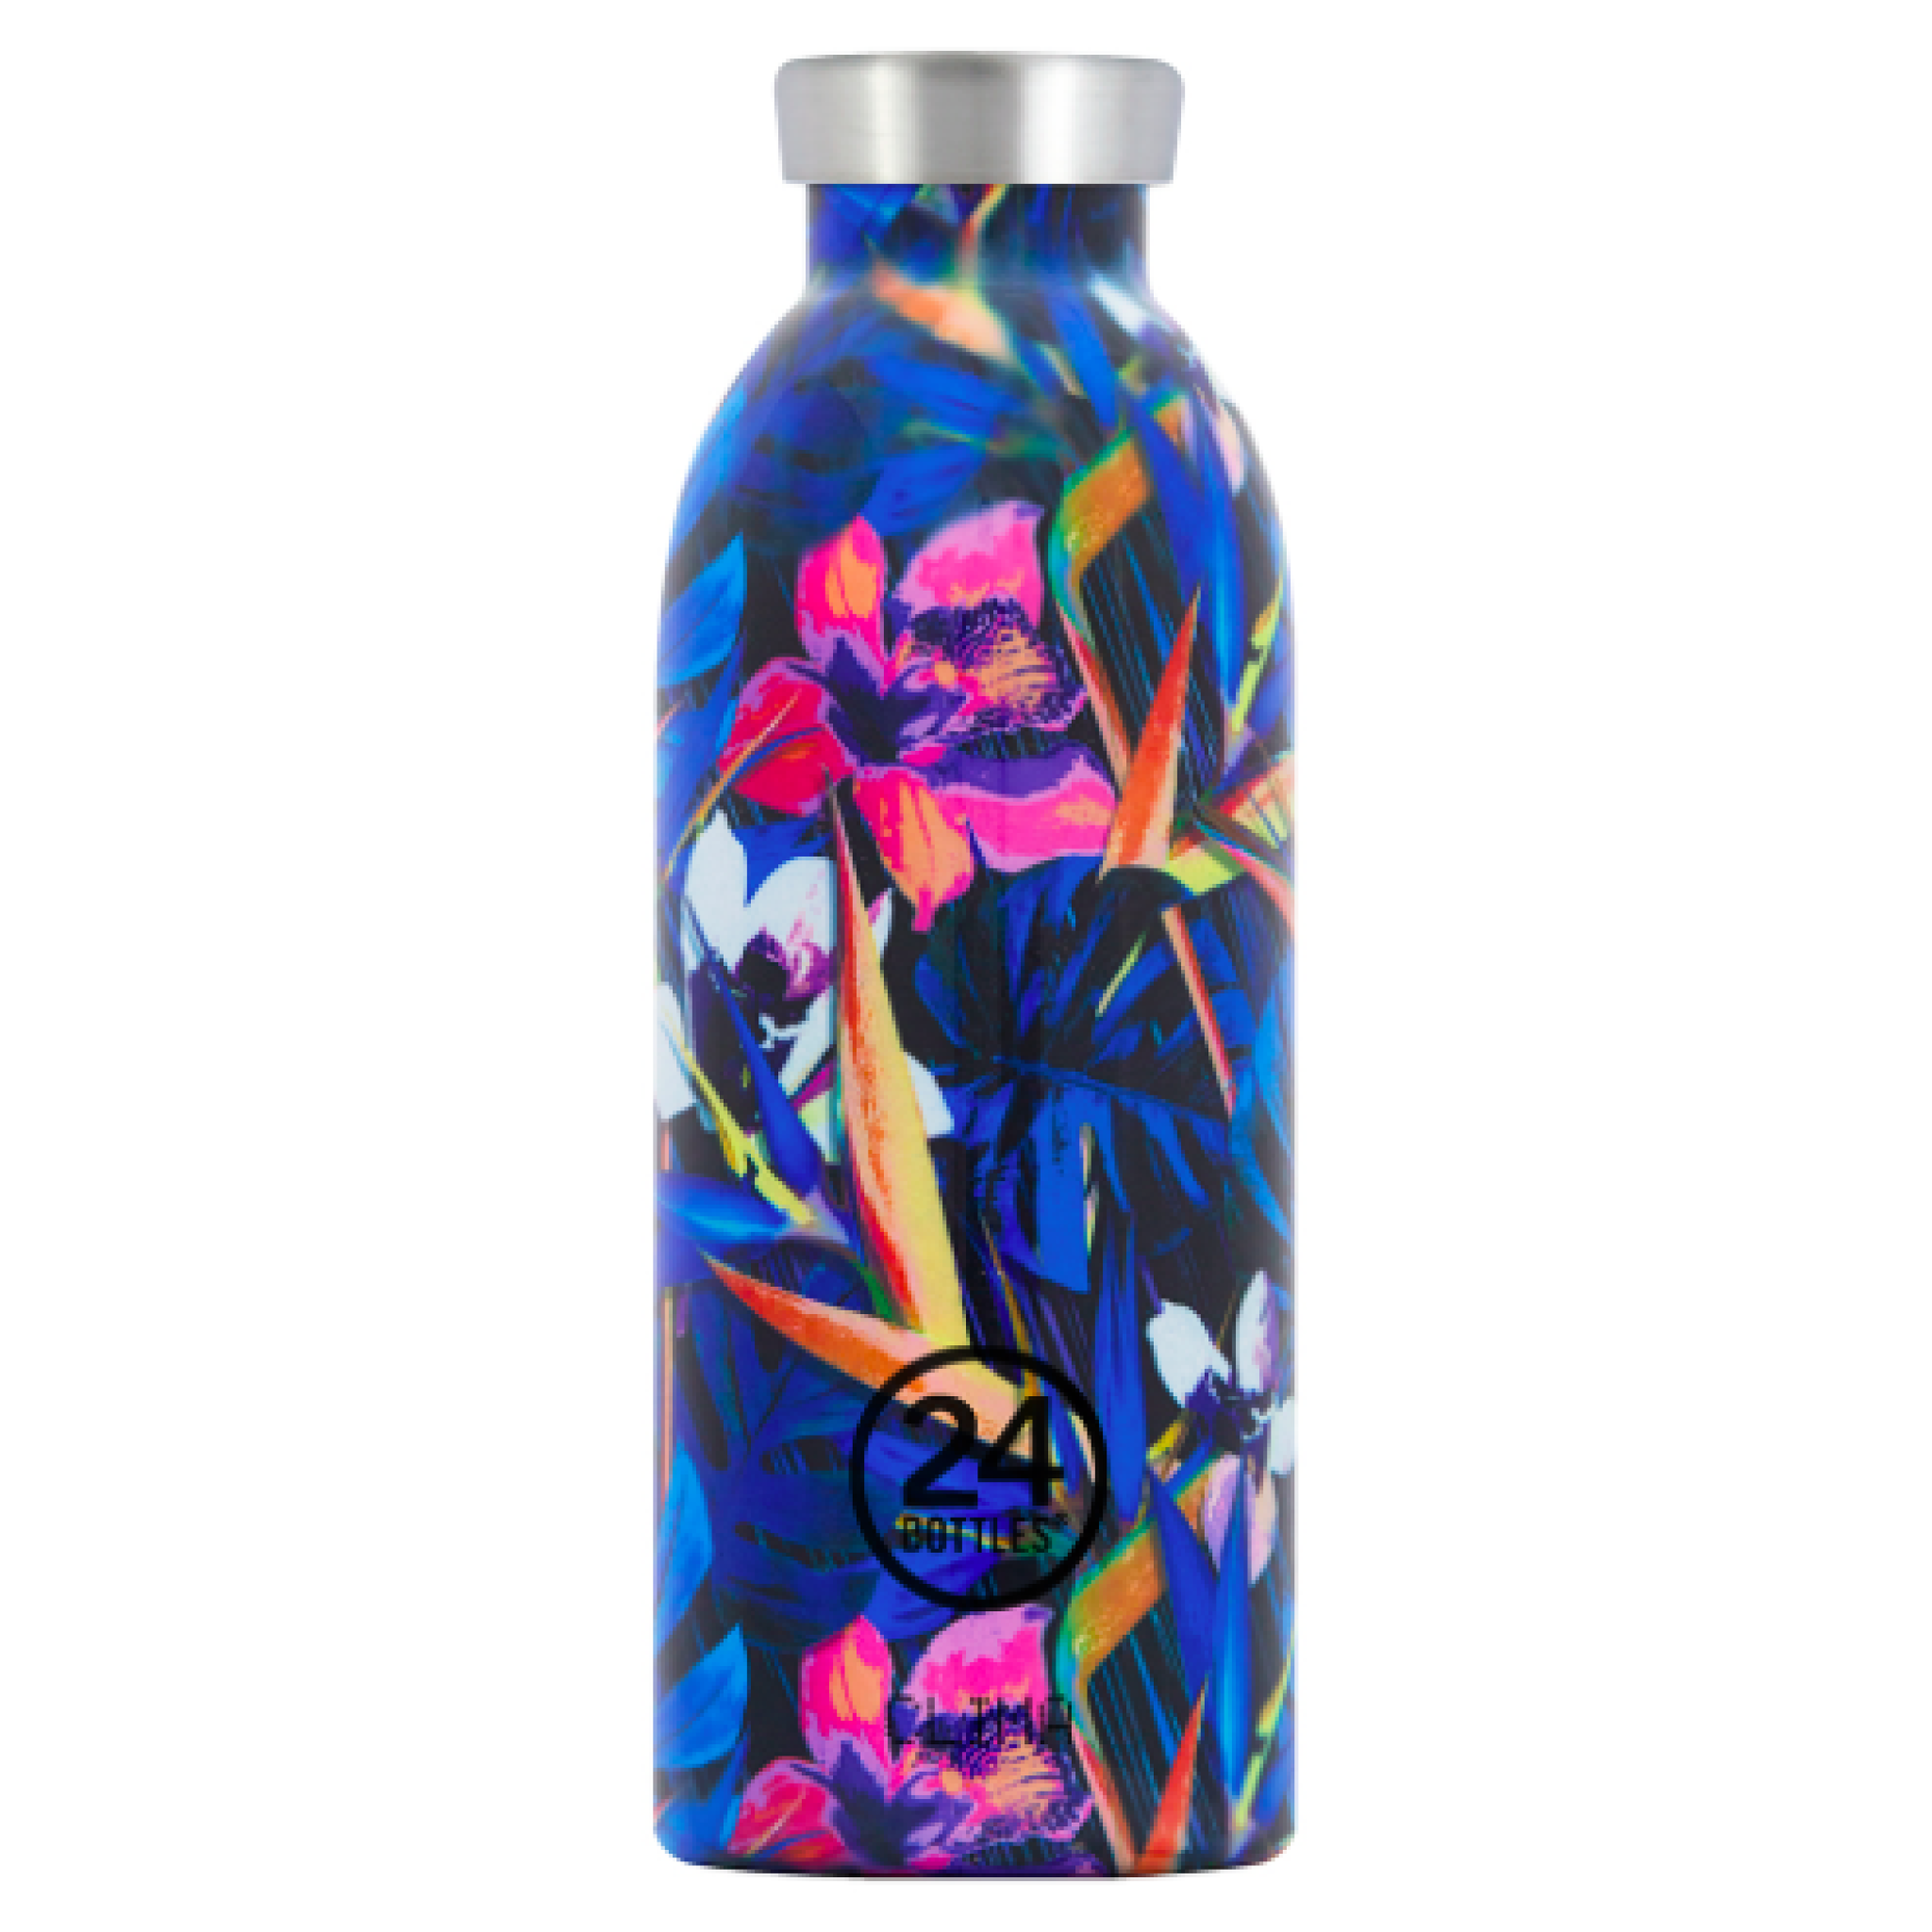 Clima 24Bottles 500 ml Floral Nightfly